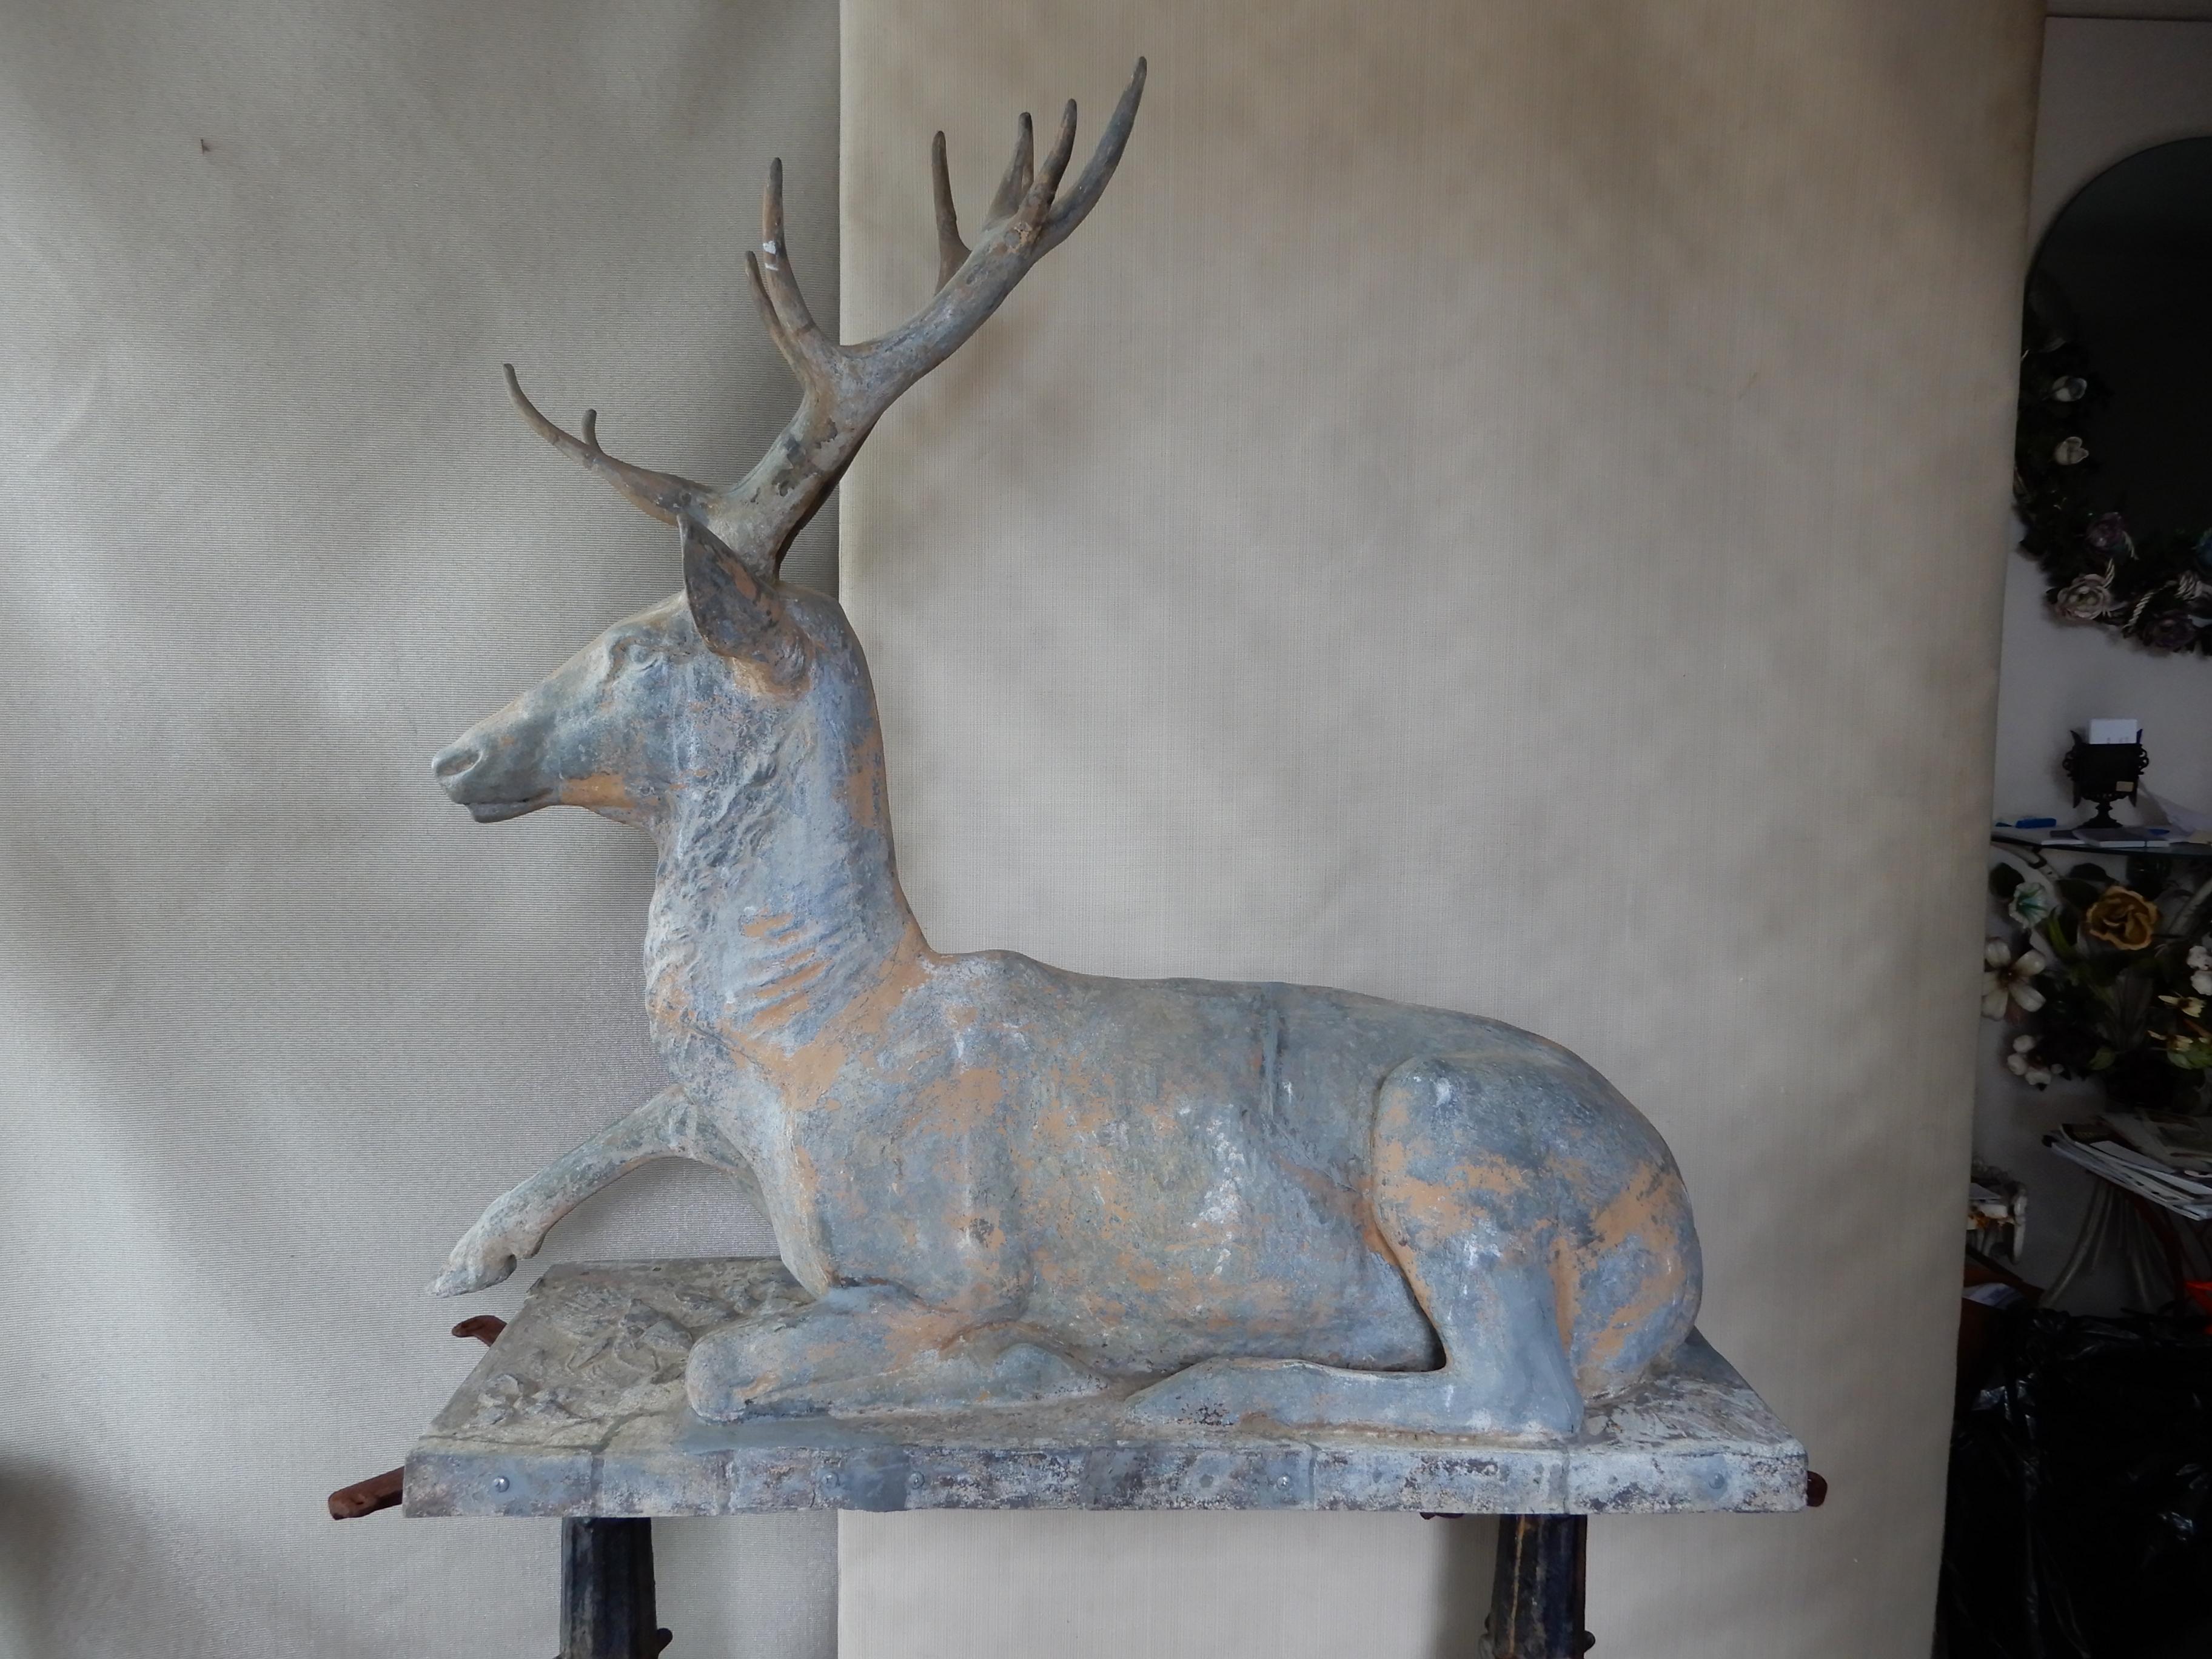 A signed Fiske reclining zinc deer. The recumbent deer with 1 leg tucked under its body First appeared in the 1874 Fiske Catalog. The info is from Carol Grissom’s book 
“Zinc Sculpture in America 1850-1950”. Sculptures of standing deer appear more